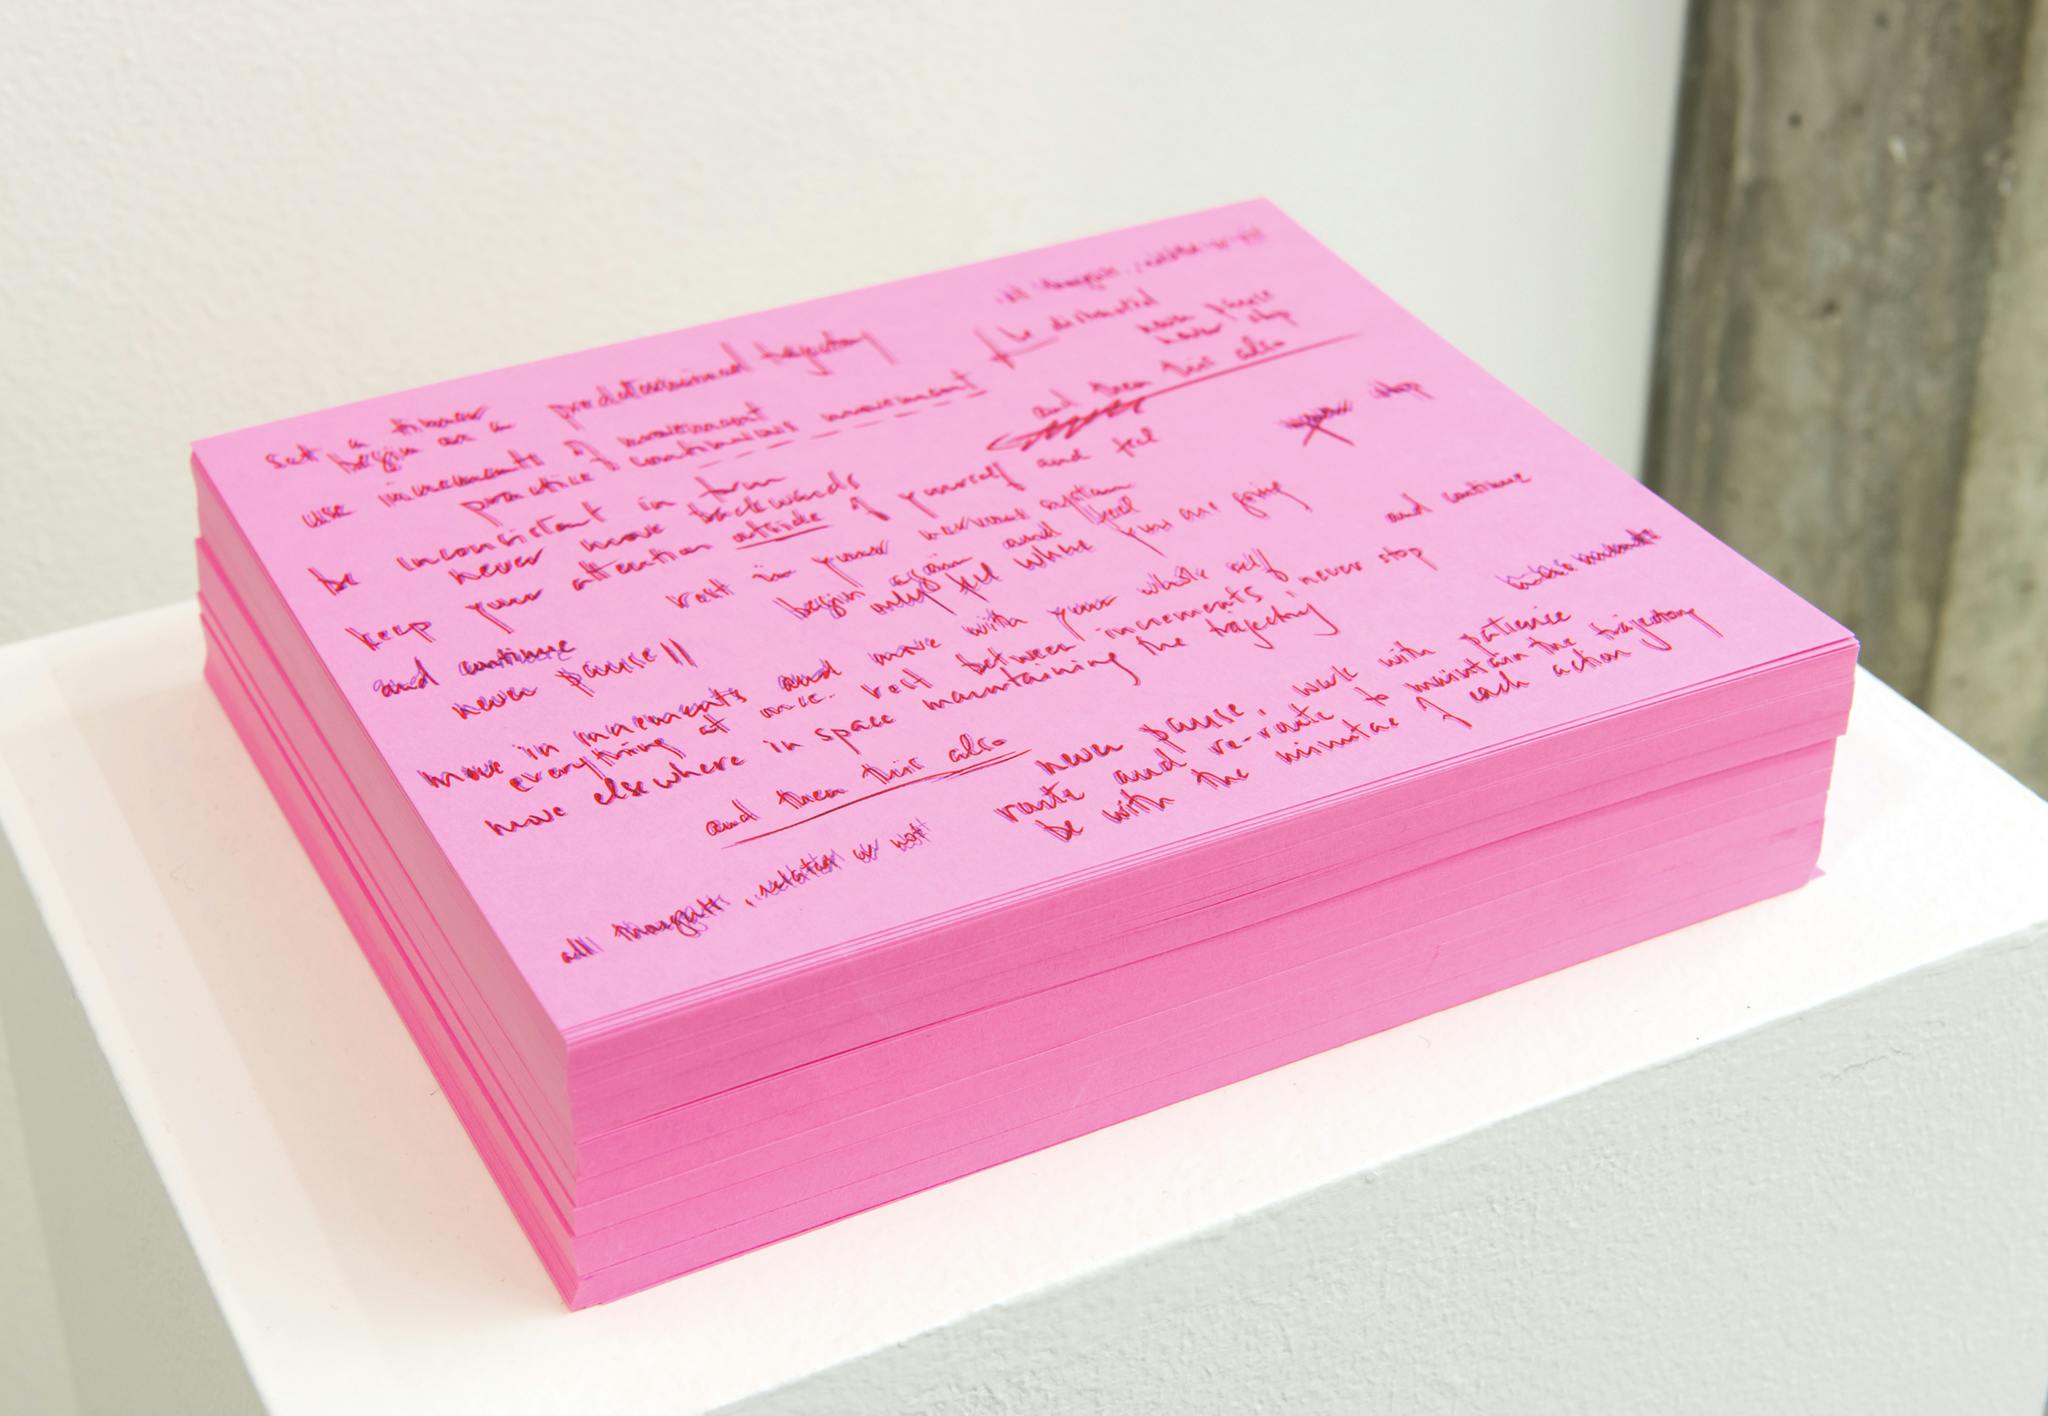 A stack of prints on pink paper sits on top of a white plinth. The prints are of handwritten notes scrawled across the page. 